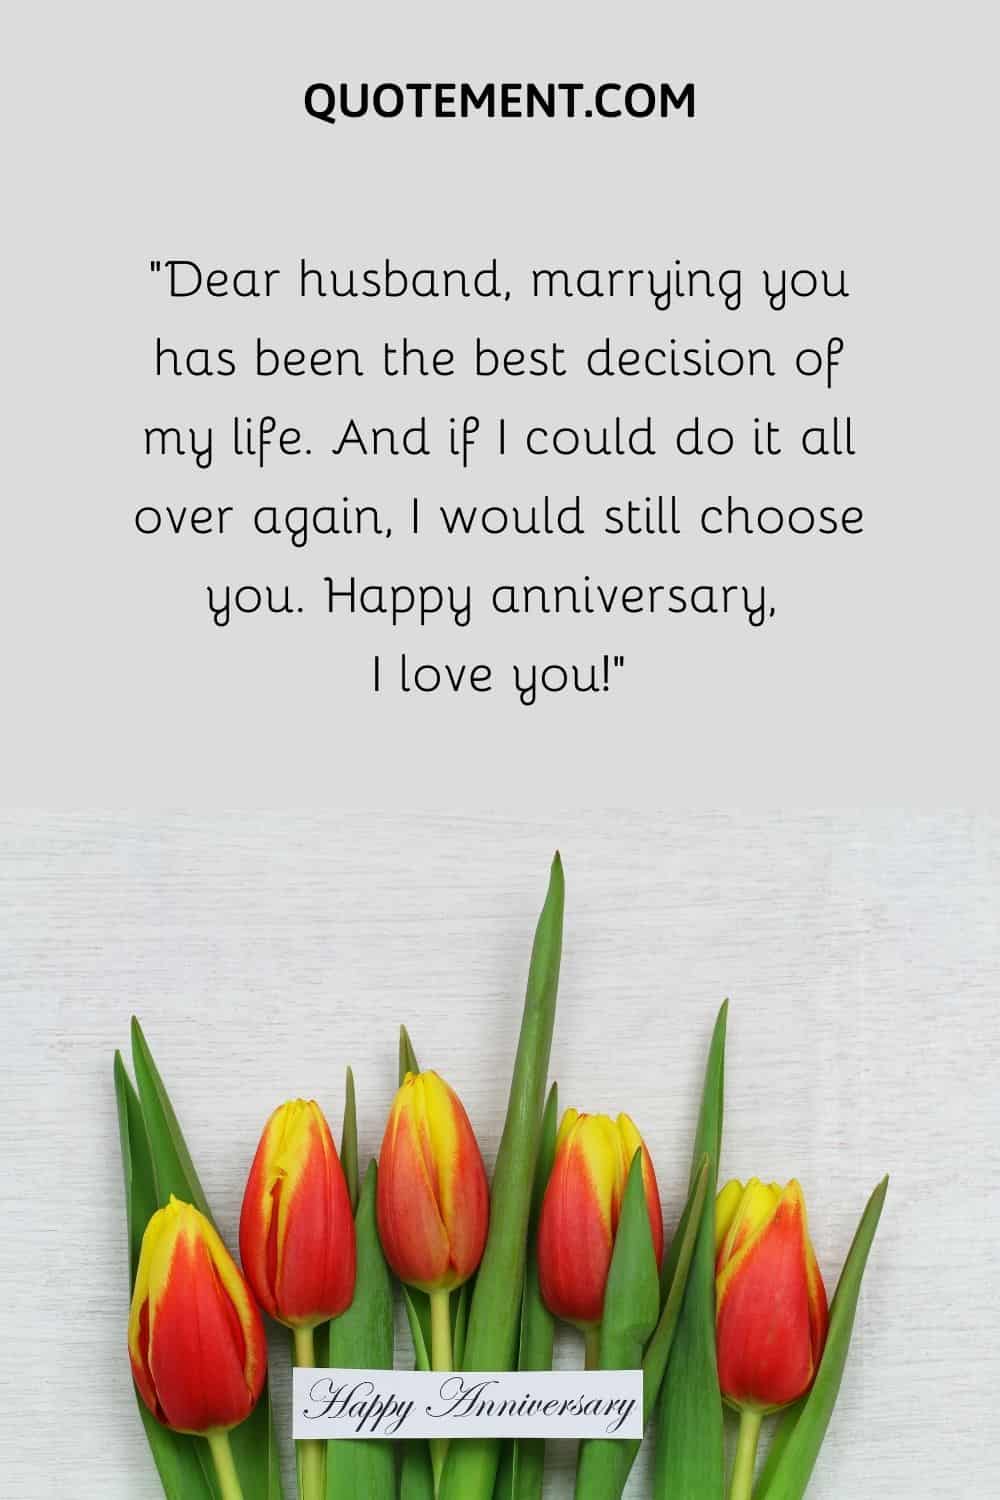 “Dear husband, marrying you has been the best decision of my life.